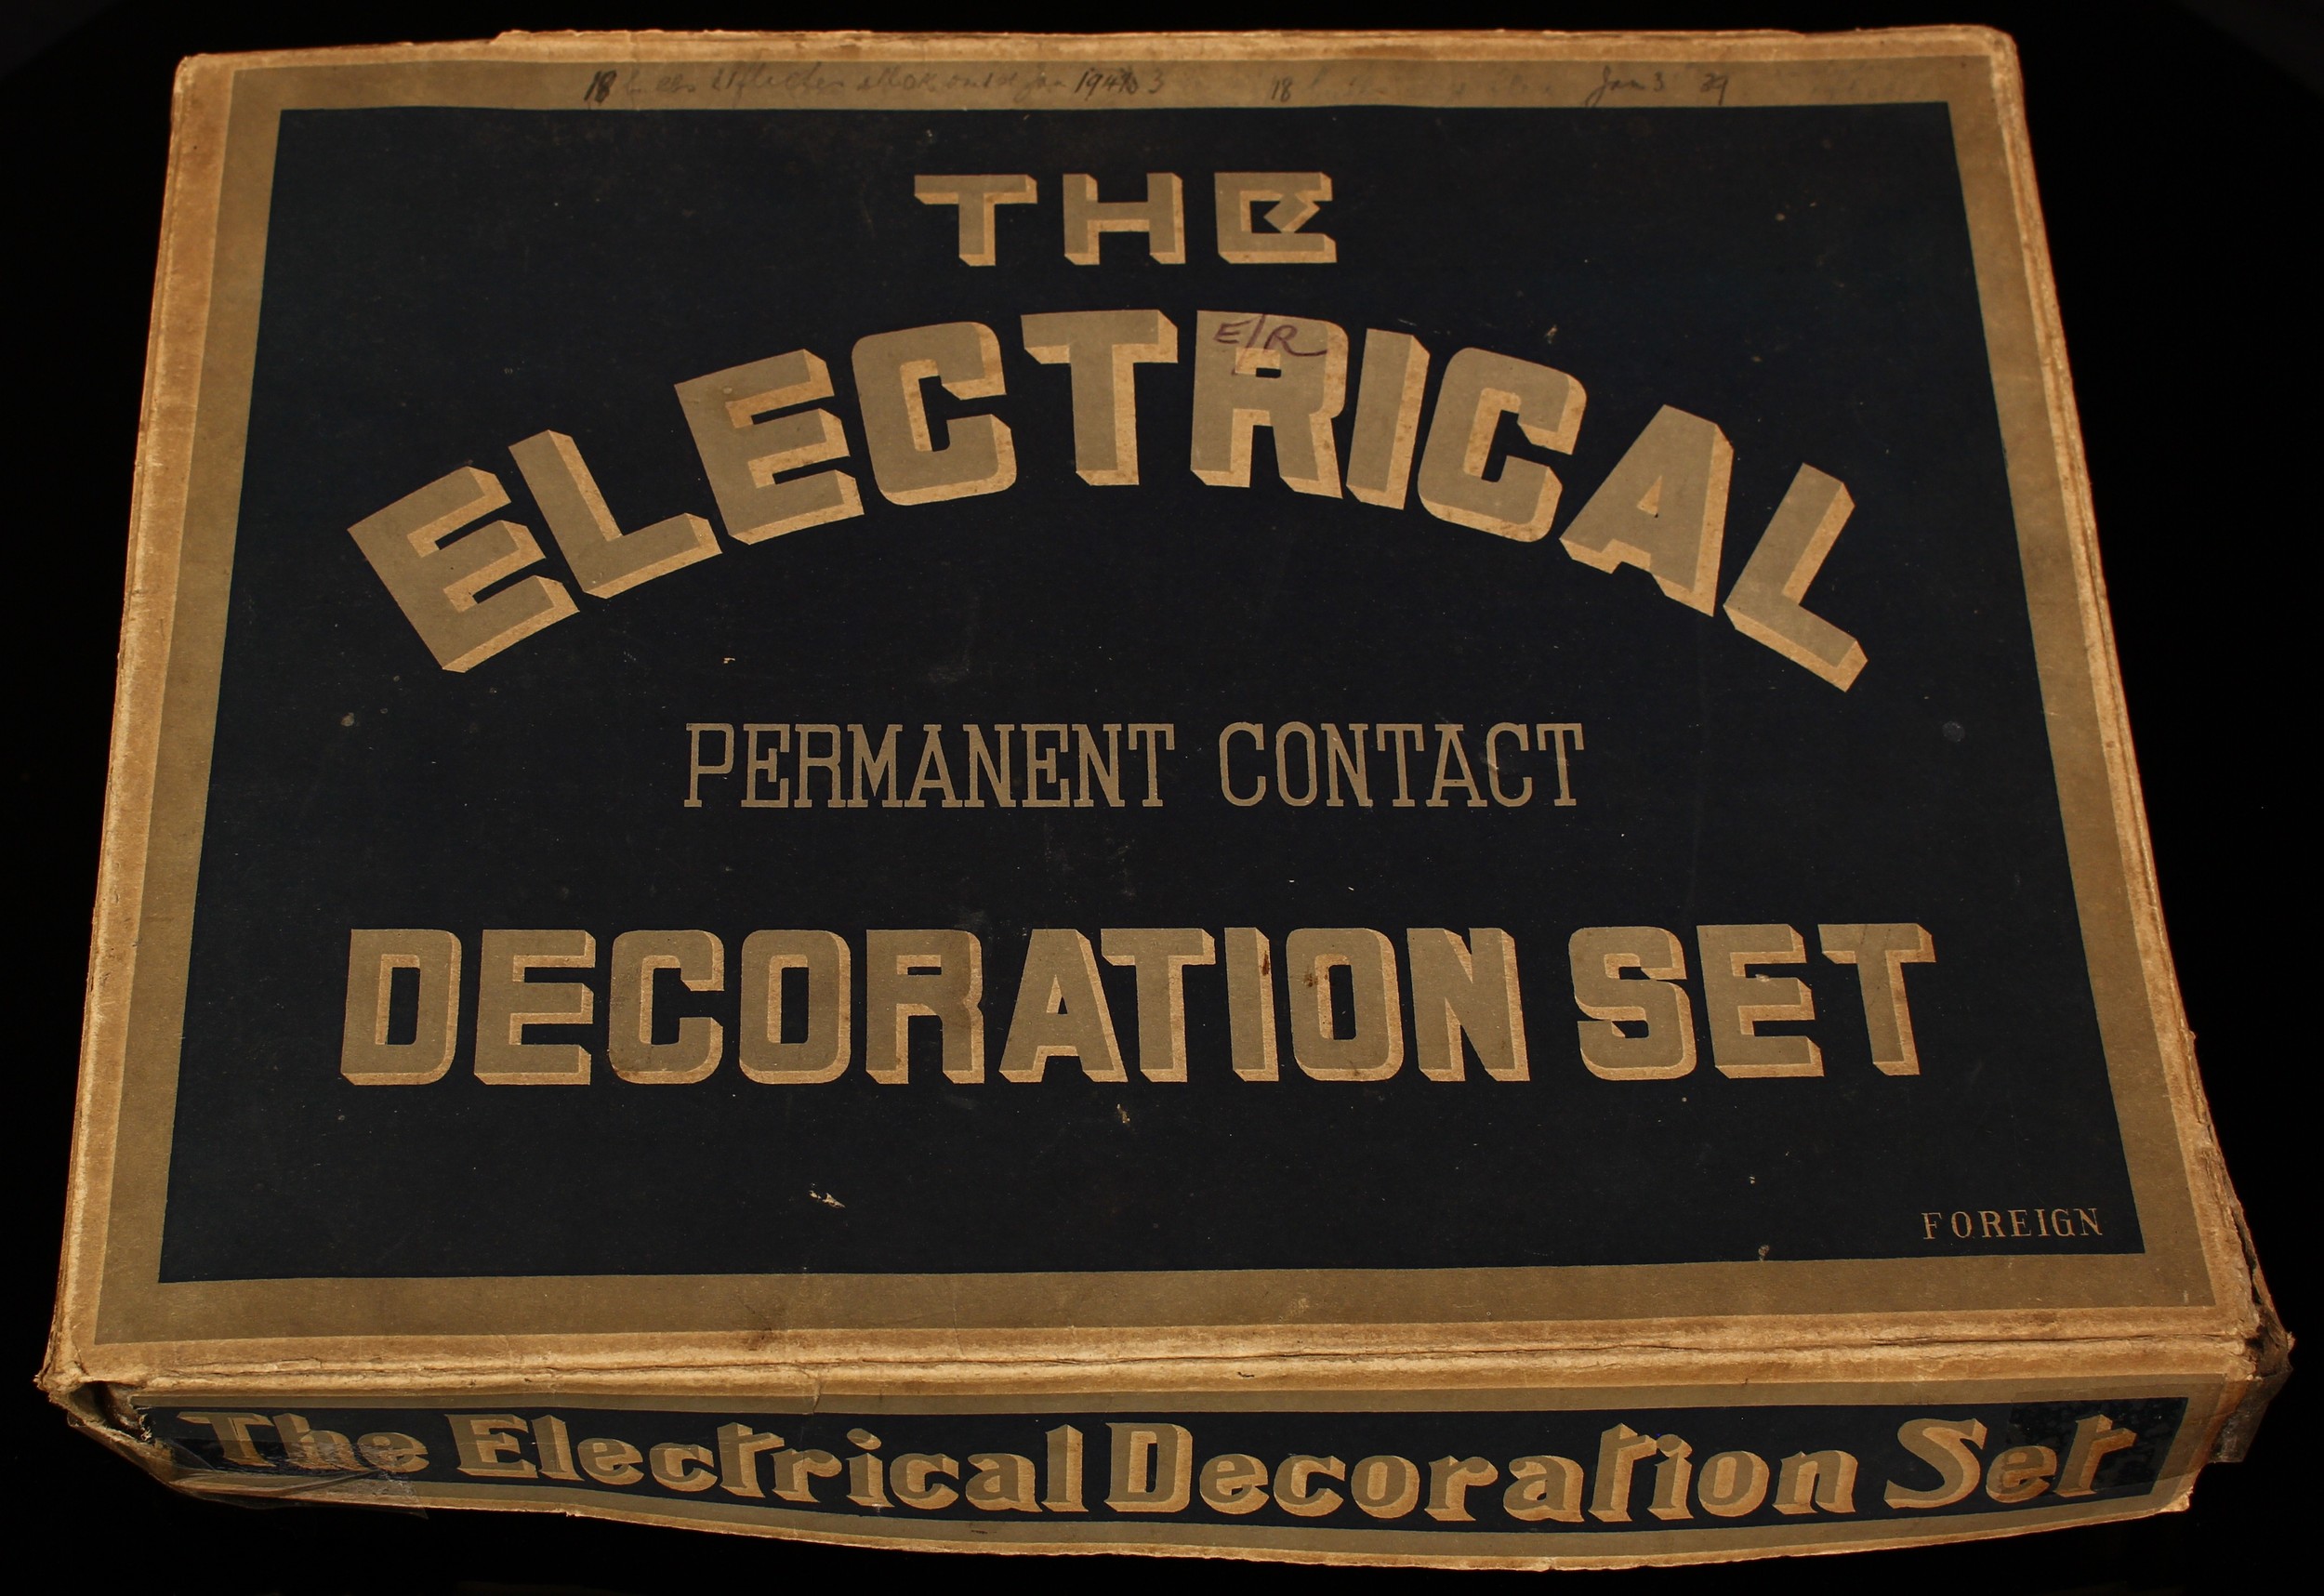 A set of 1940's novelty decorative Christmas light bulbs, The Electrical Permanent Contact - Image 4 of 8